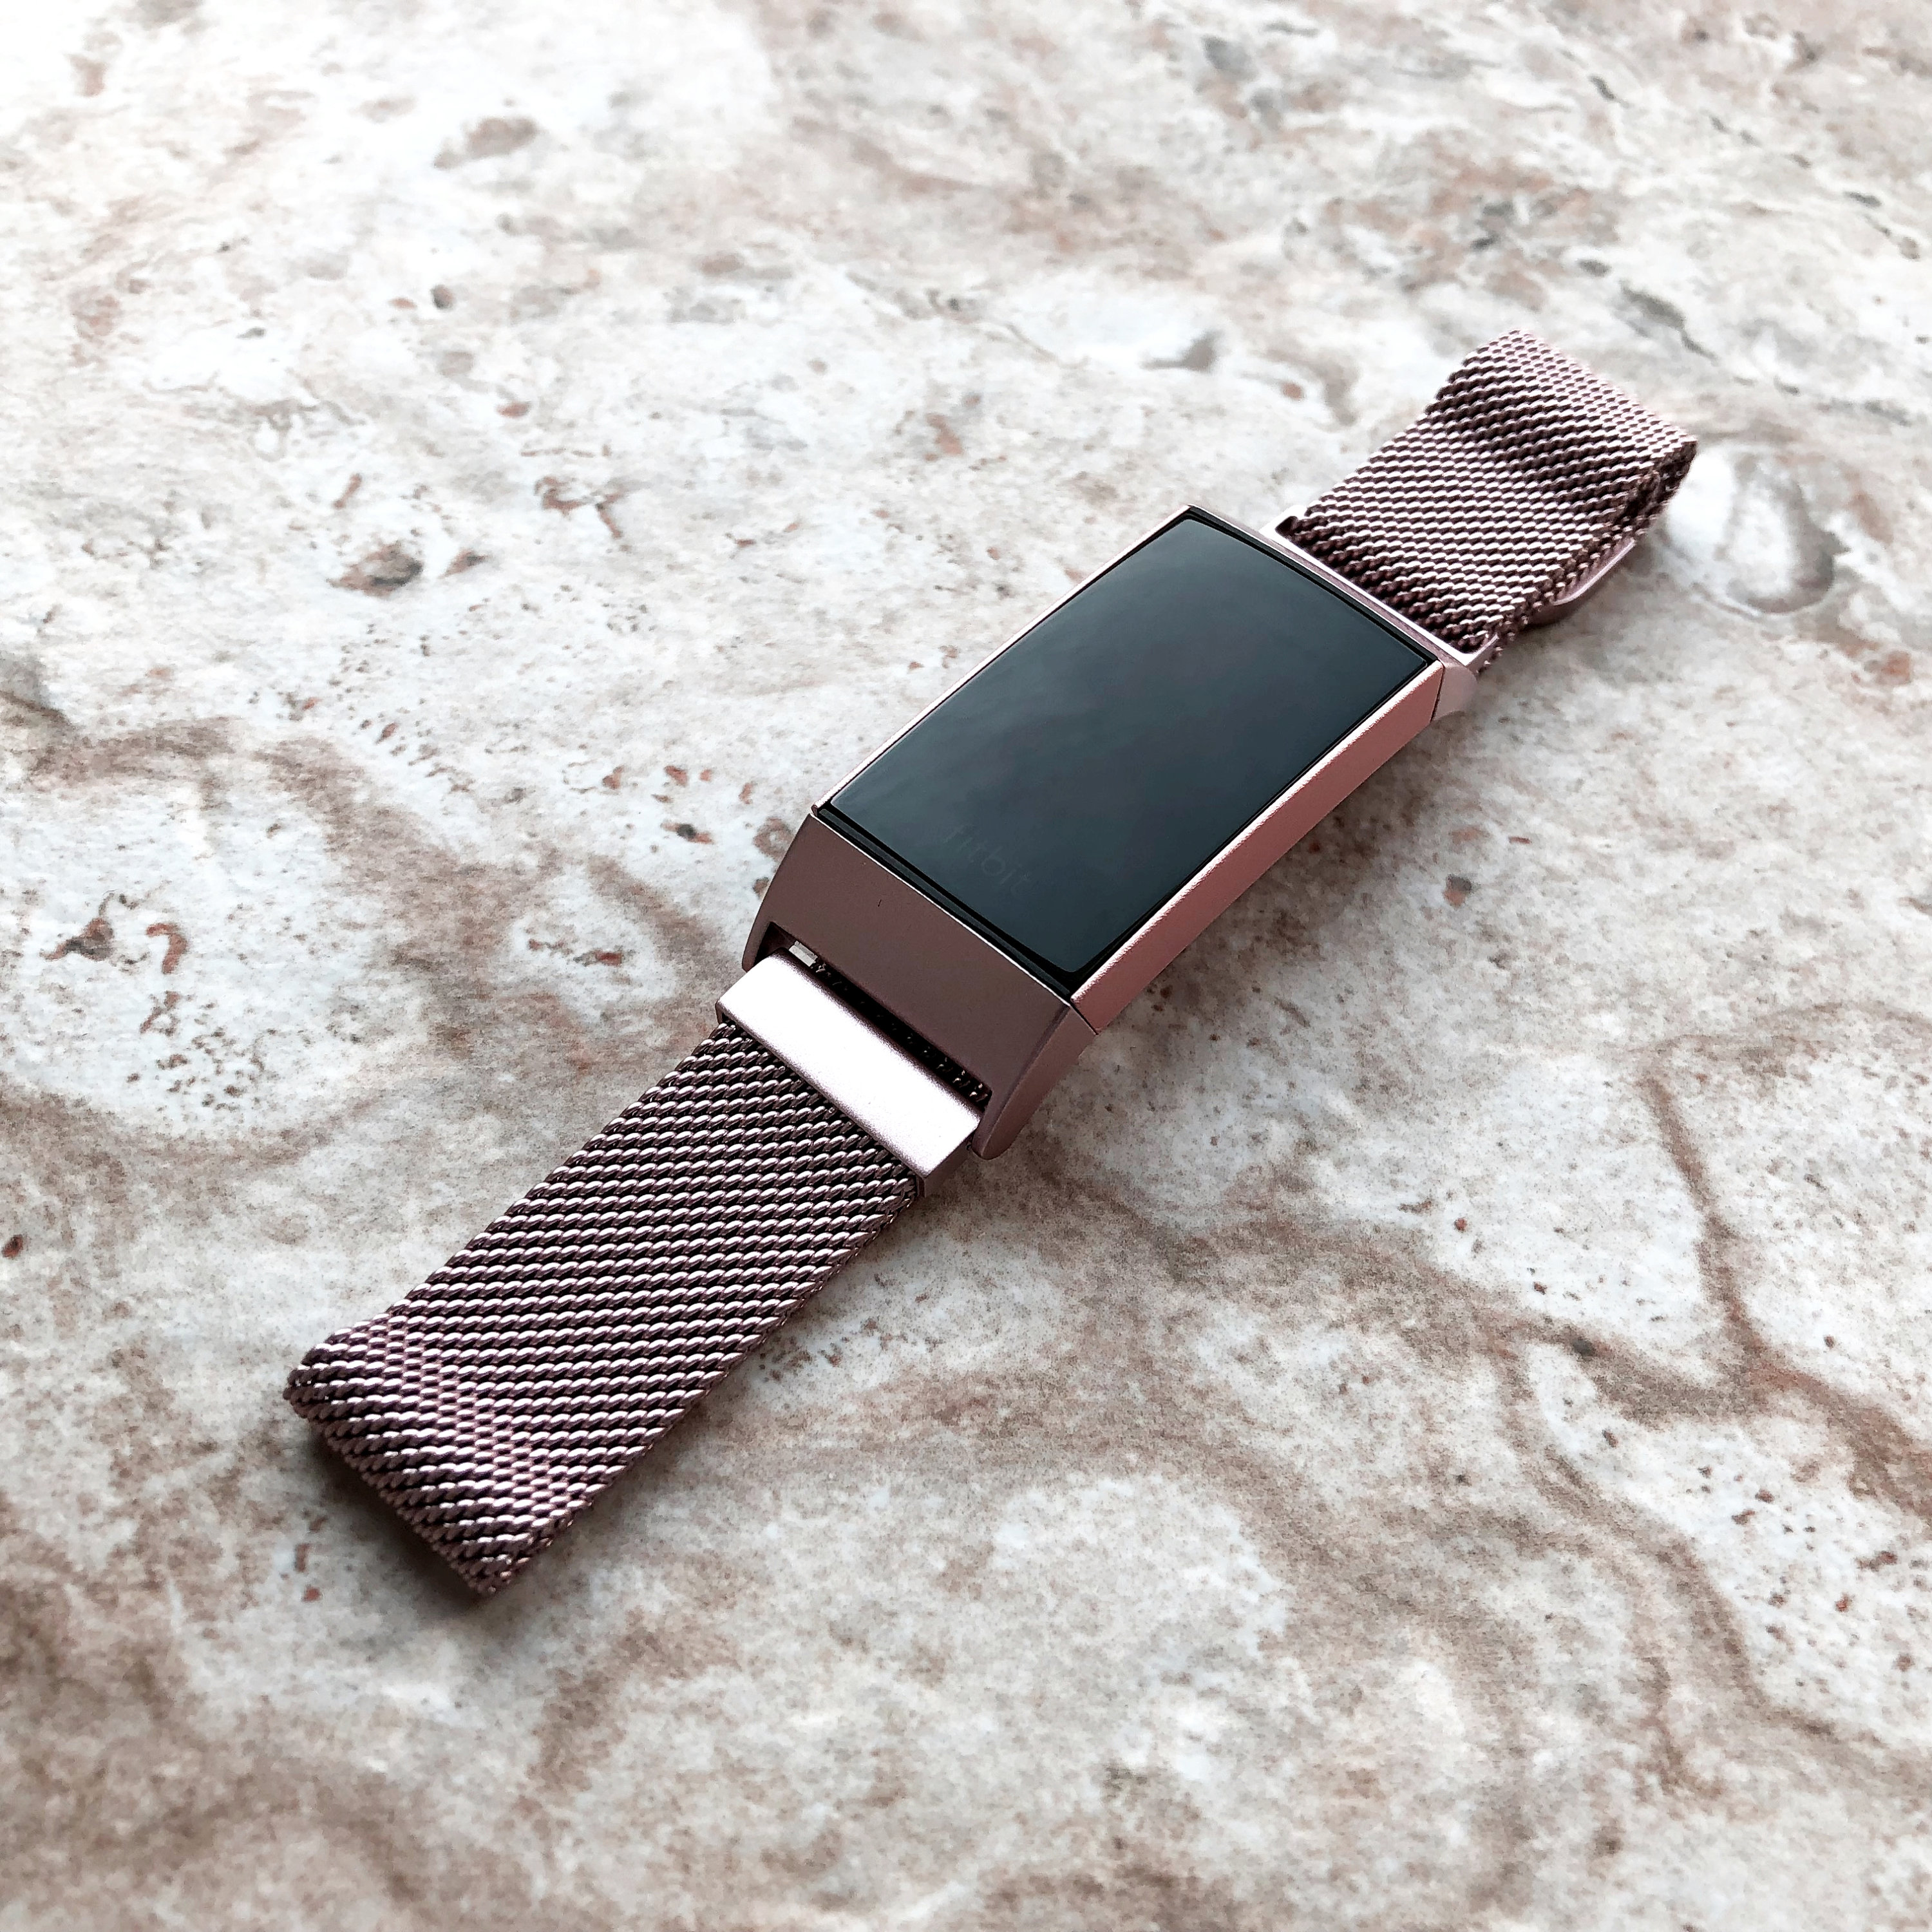 fitbit milanese band